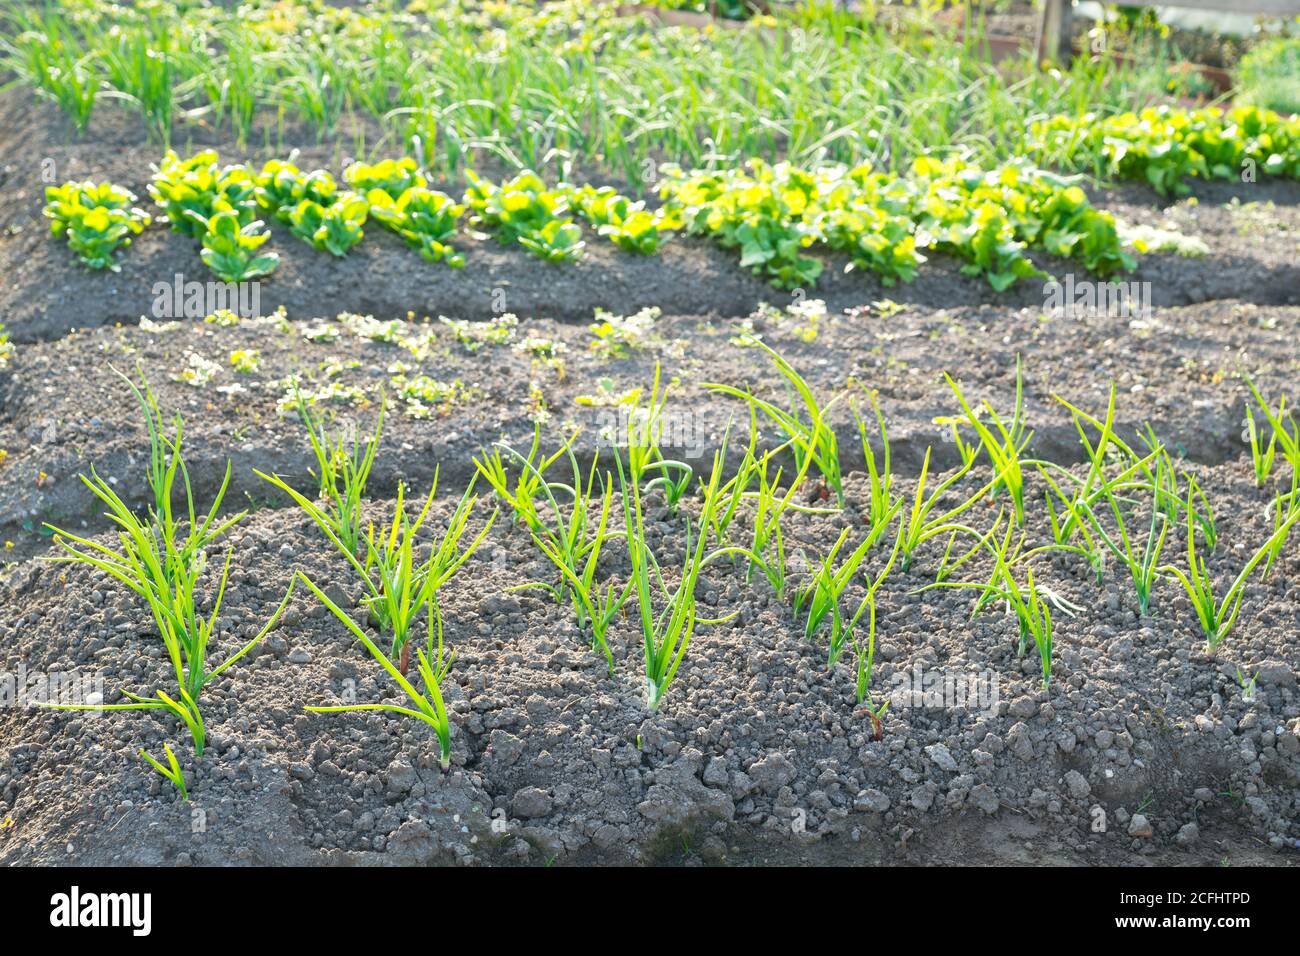 Fresh young scallions and on a sunny vegetable garden patch with other vegetables in the background. Stock Photo